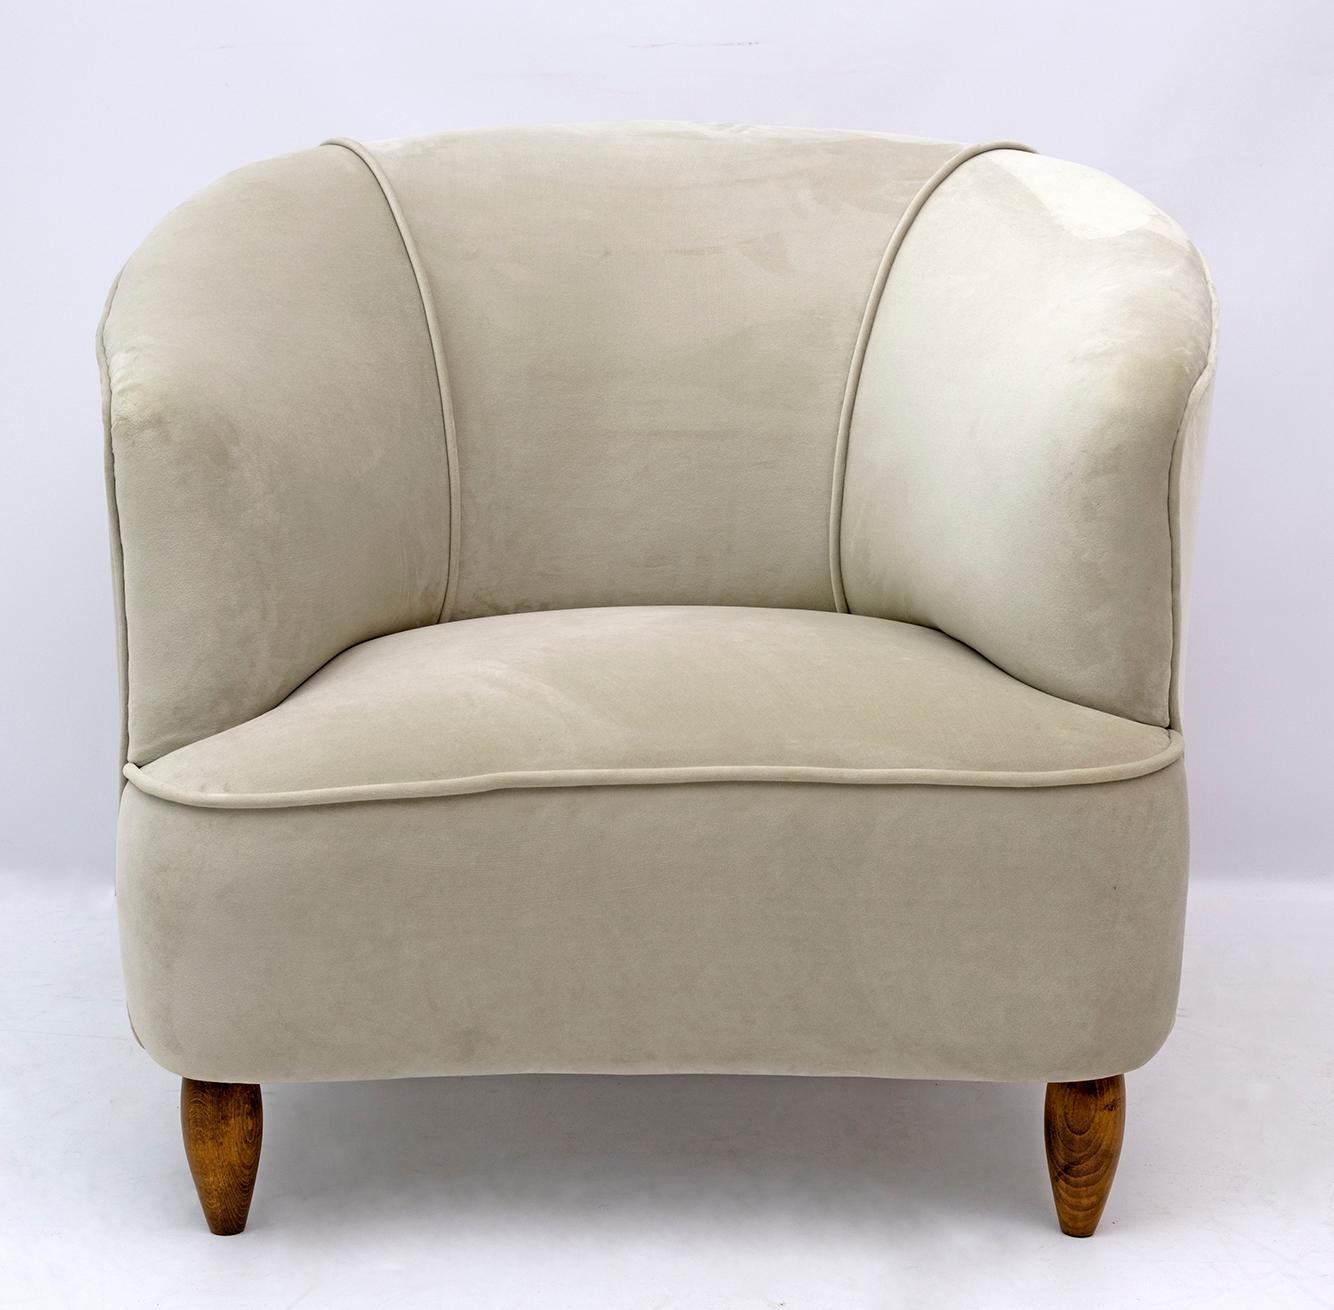 Armchair designed by Gio Ponti and produced by Casa e Giardino in 1936.
The armchair has been restored and upholstered in velvet.r.